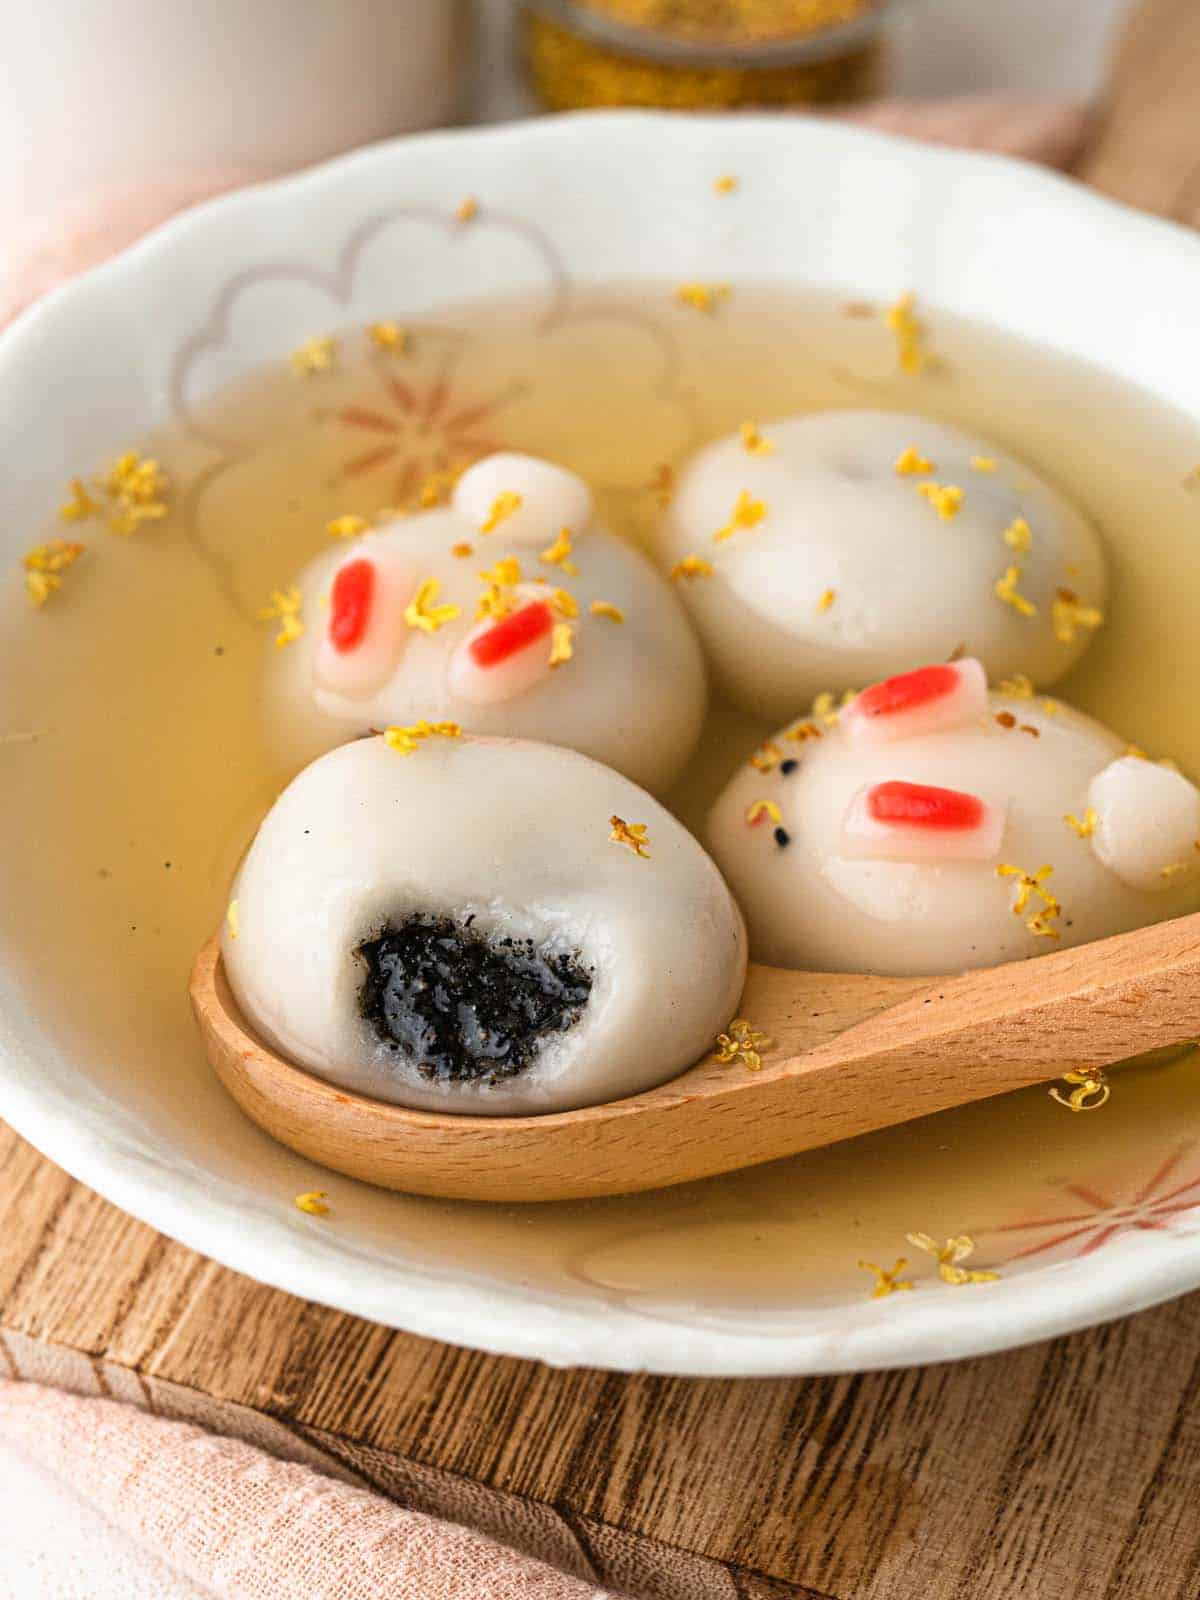 bunny shaped tang yuan filled with black sesame in ginger soup